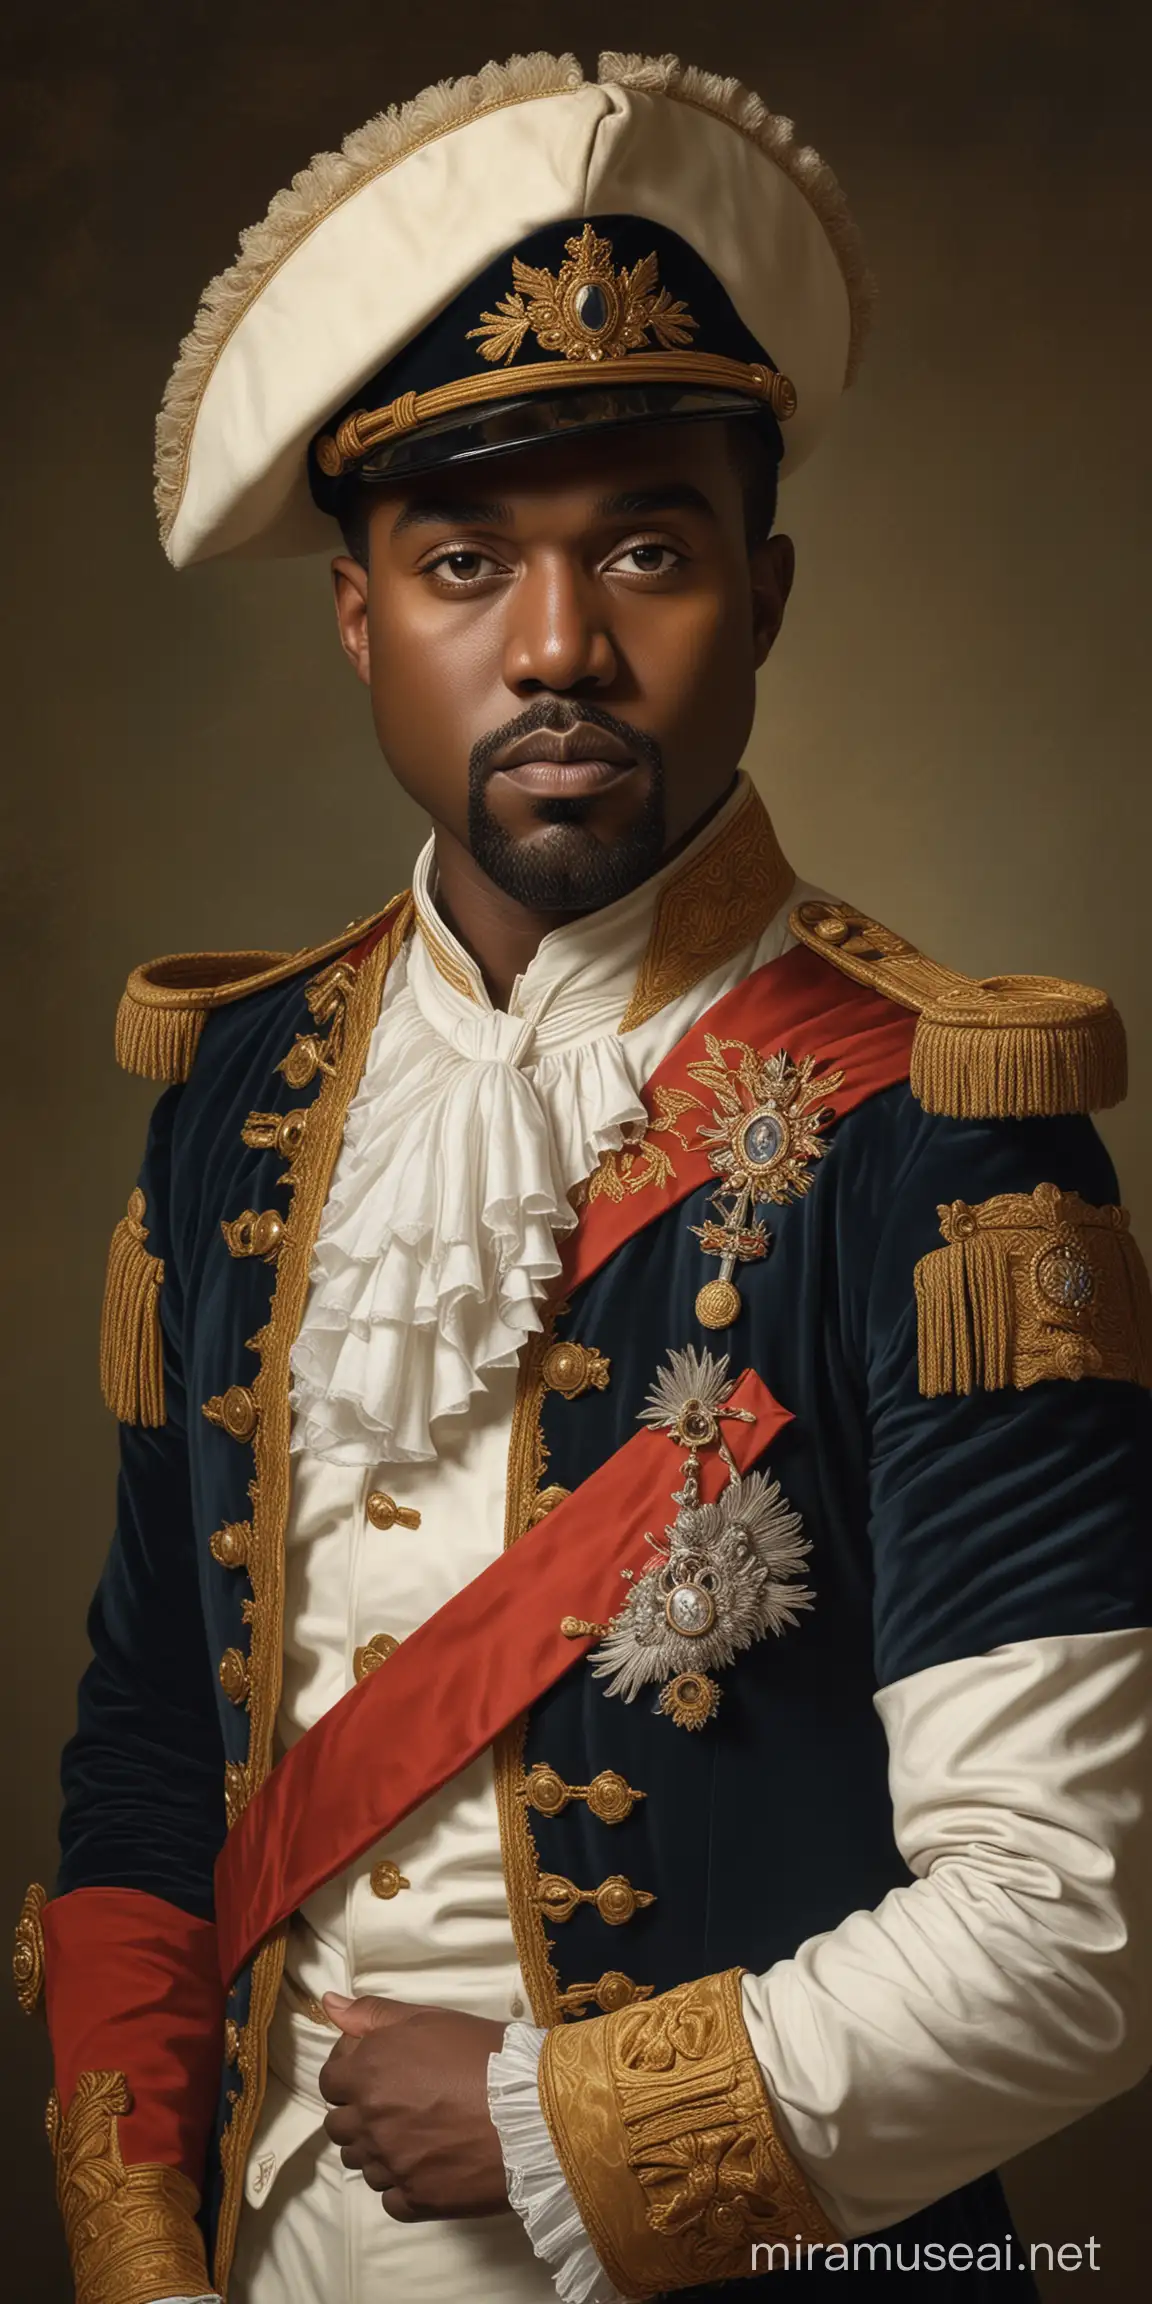 Renaissance style portrait of Kanye West, dressed in Napoleon Bonaparte's uniform and hat, dignified expression